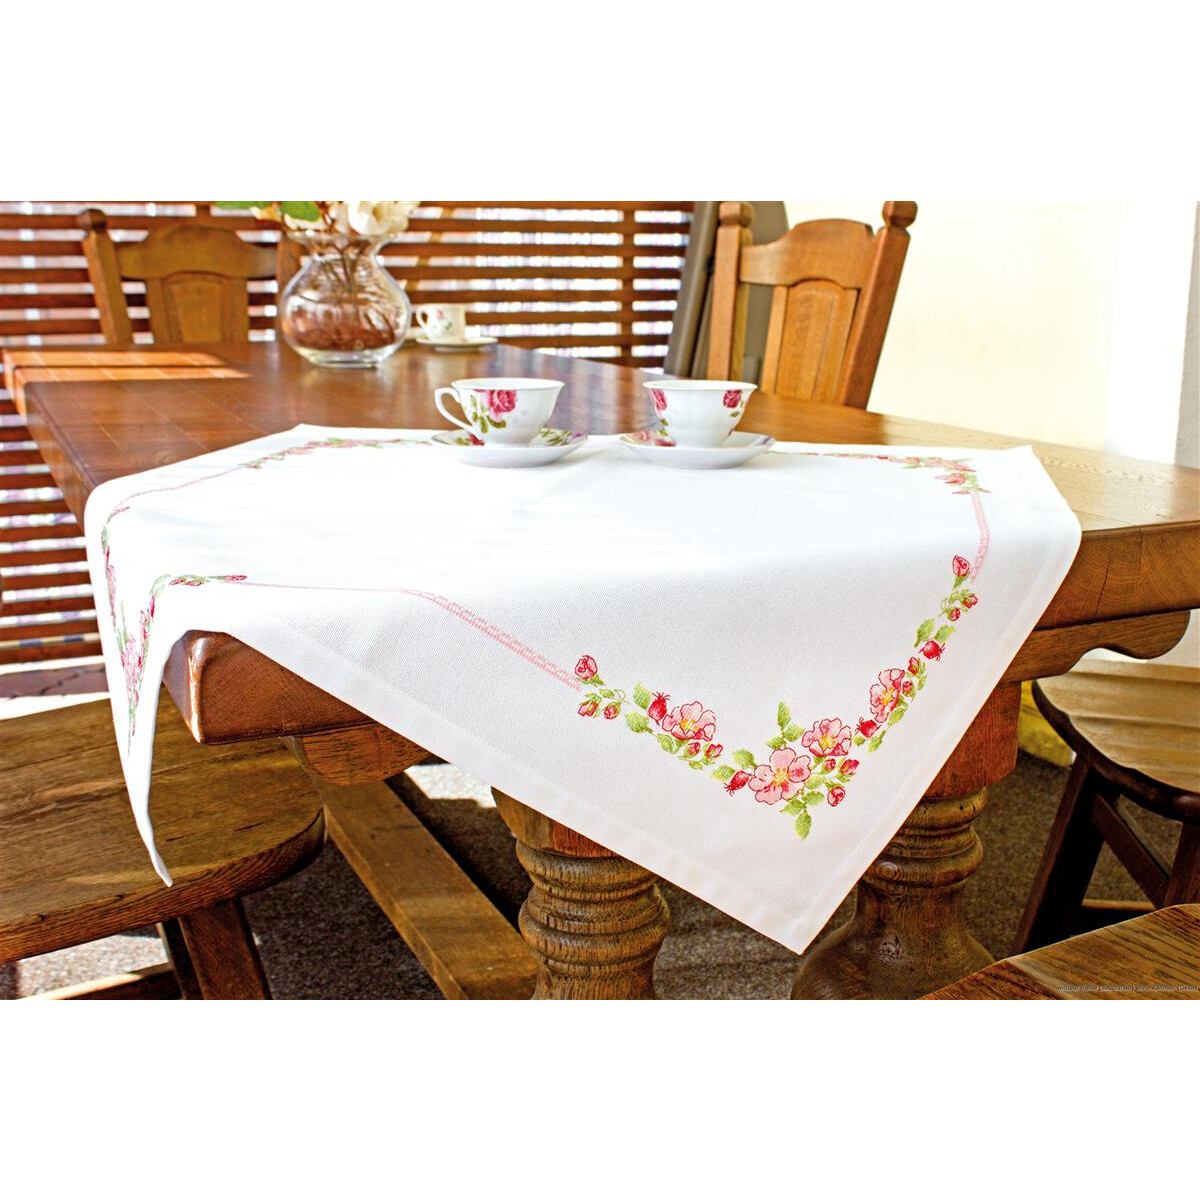 A wooden dining table with a white tablecloth embroidered...